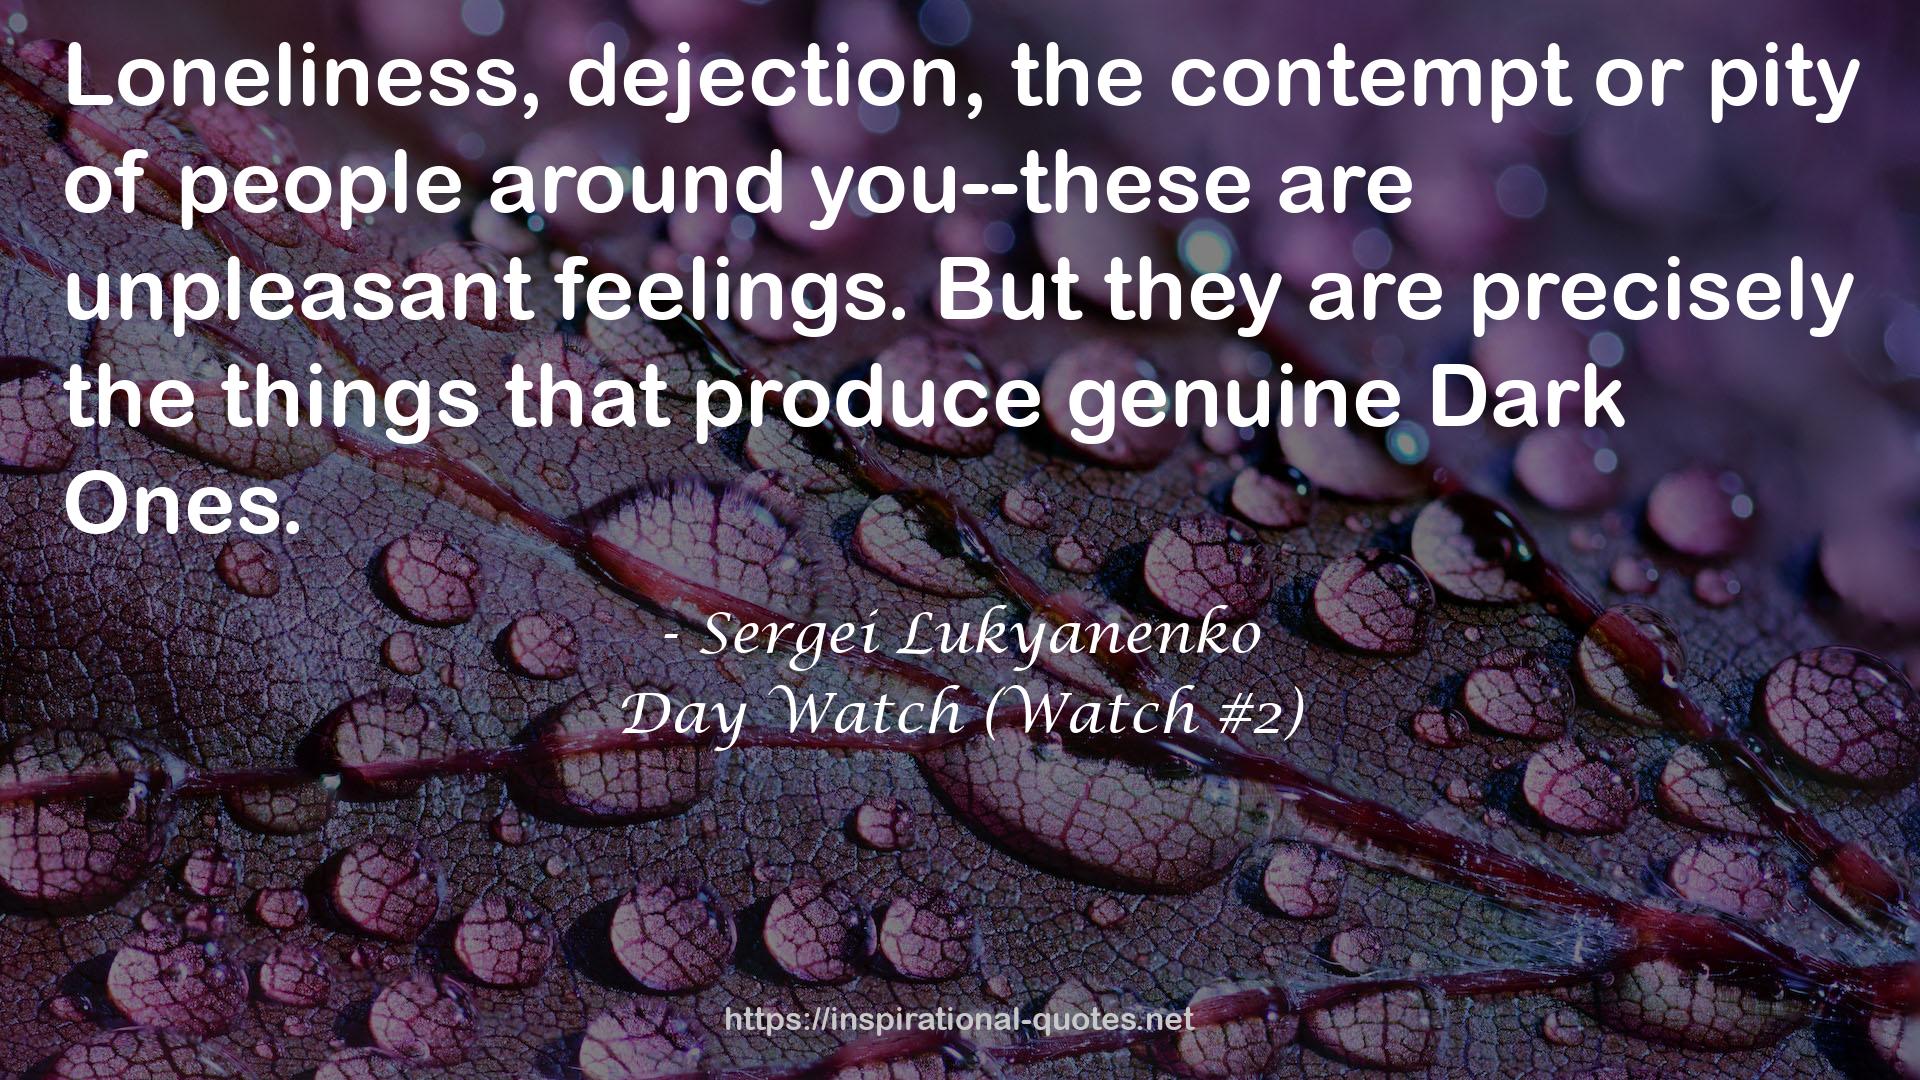 Day Watch (Watch #2) QUOTES